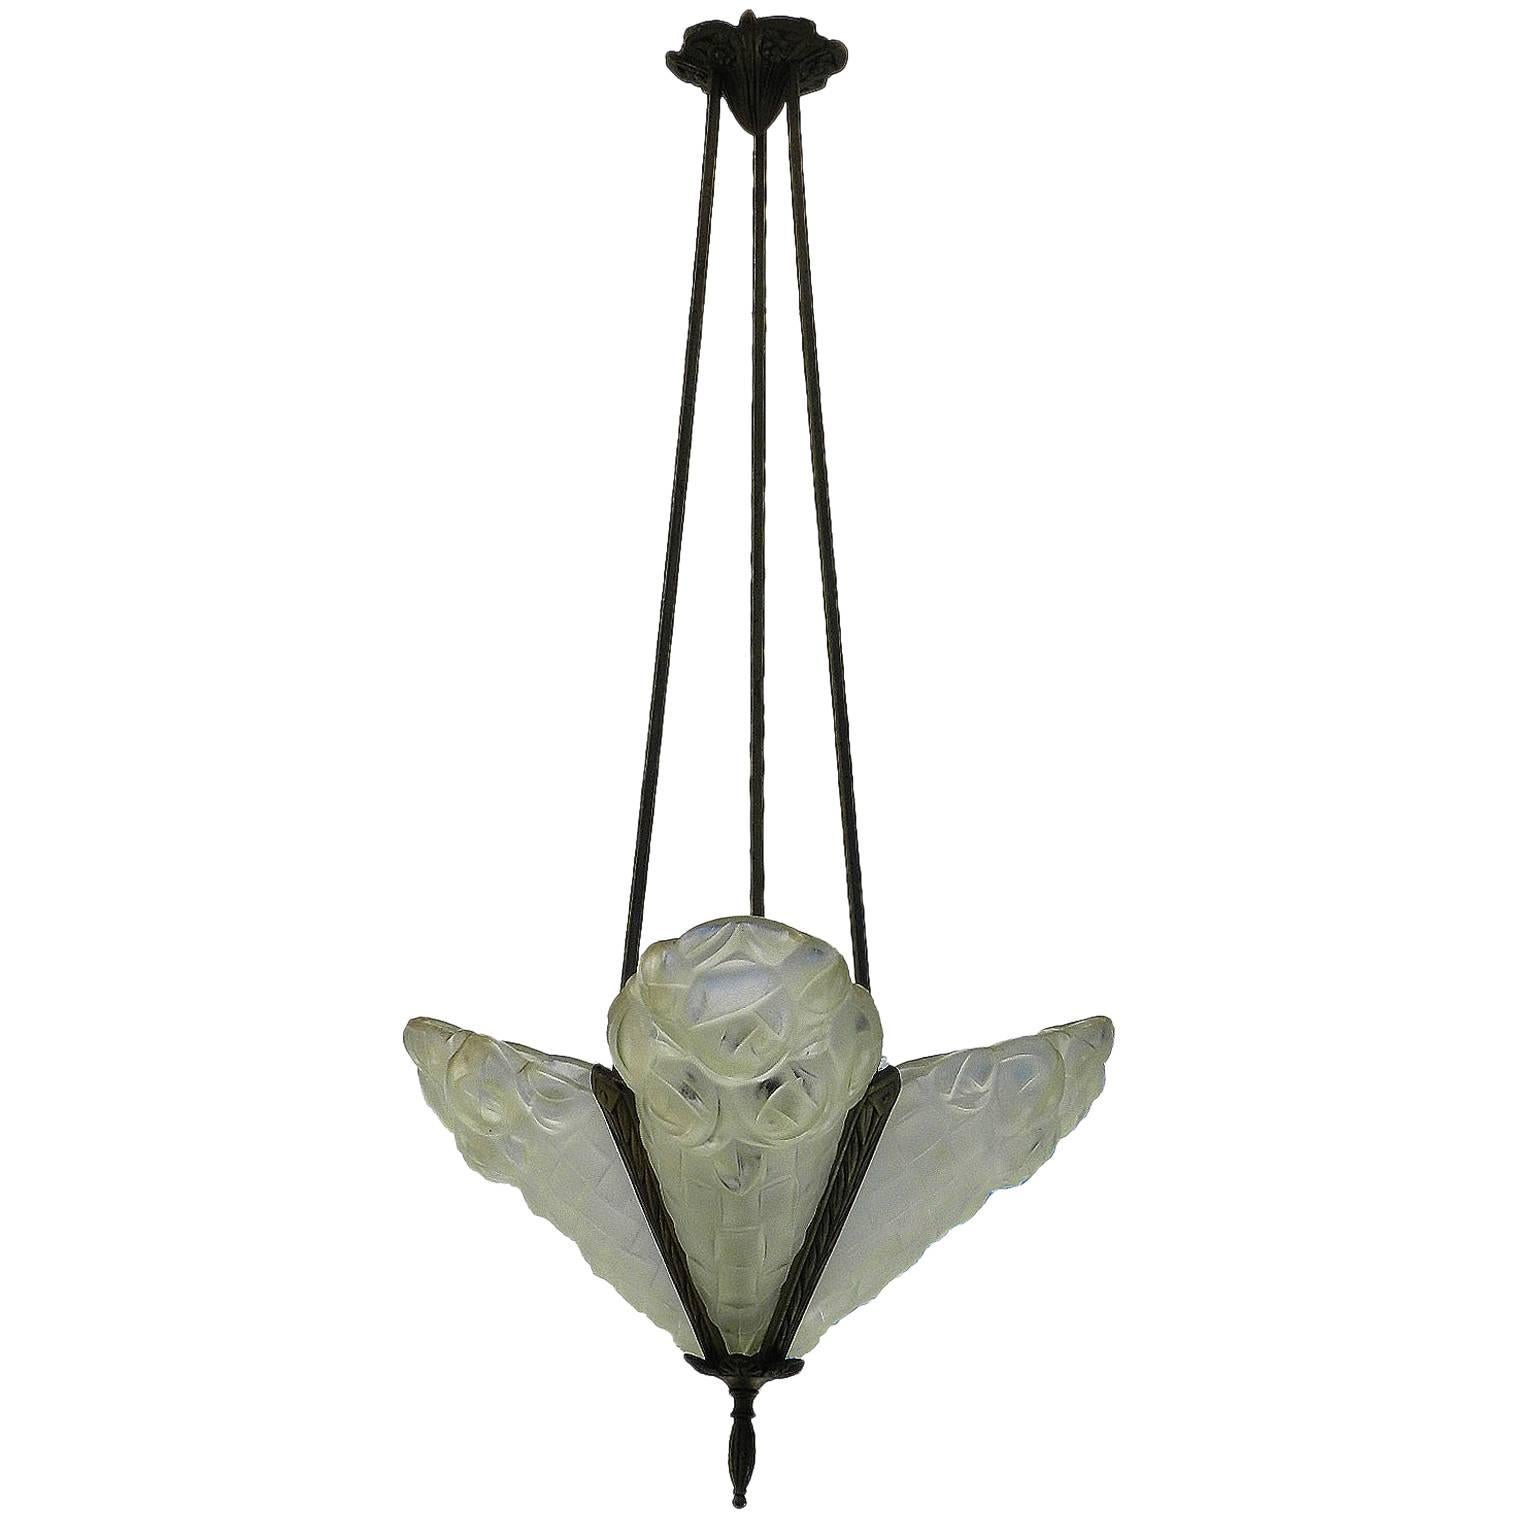 Art Deco Chandelier Signed by Degue French Glass Pendant Light, circa 1930